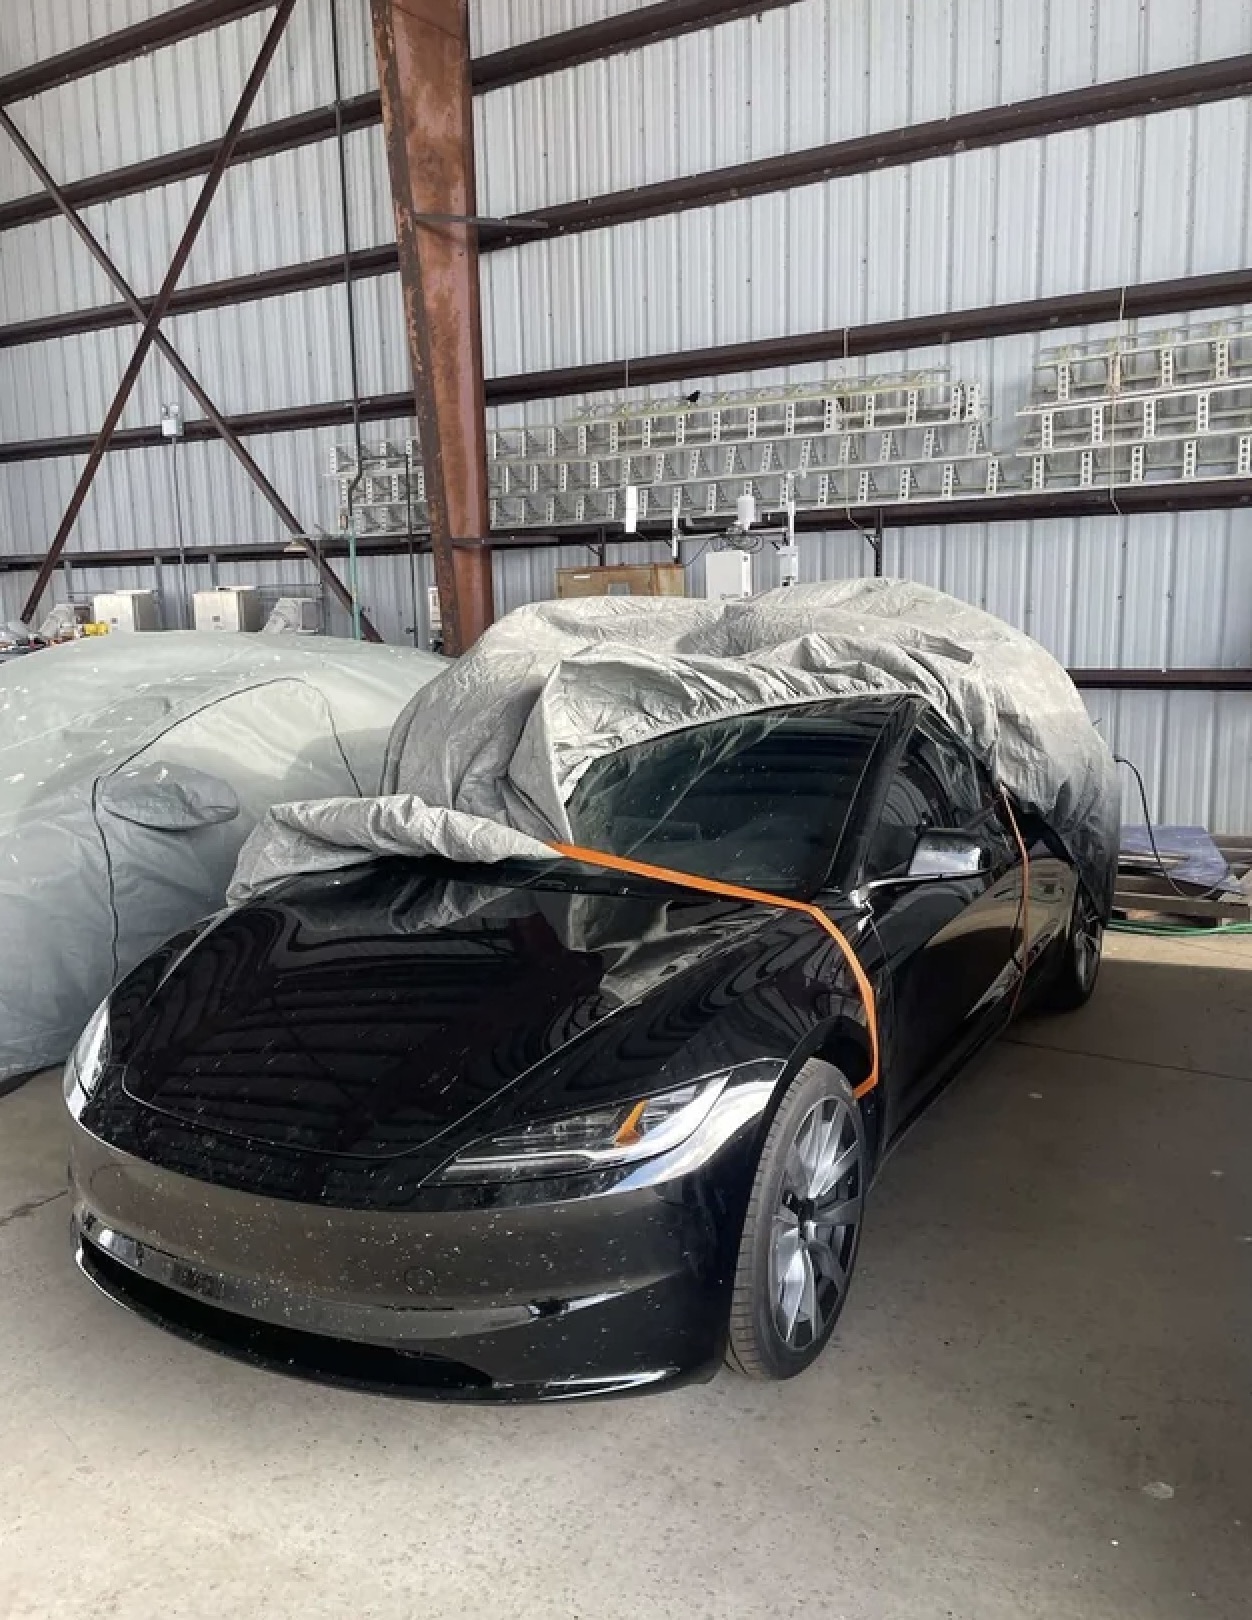 Is this a leaked photo of the Tesla Model 3 refresh? if so wow